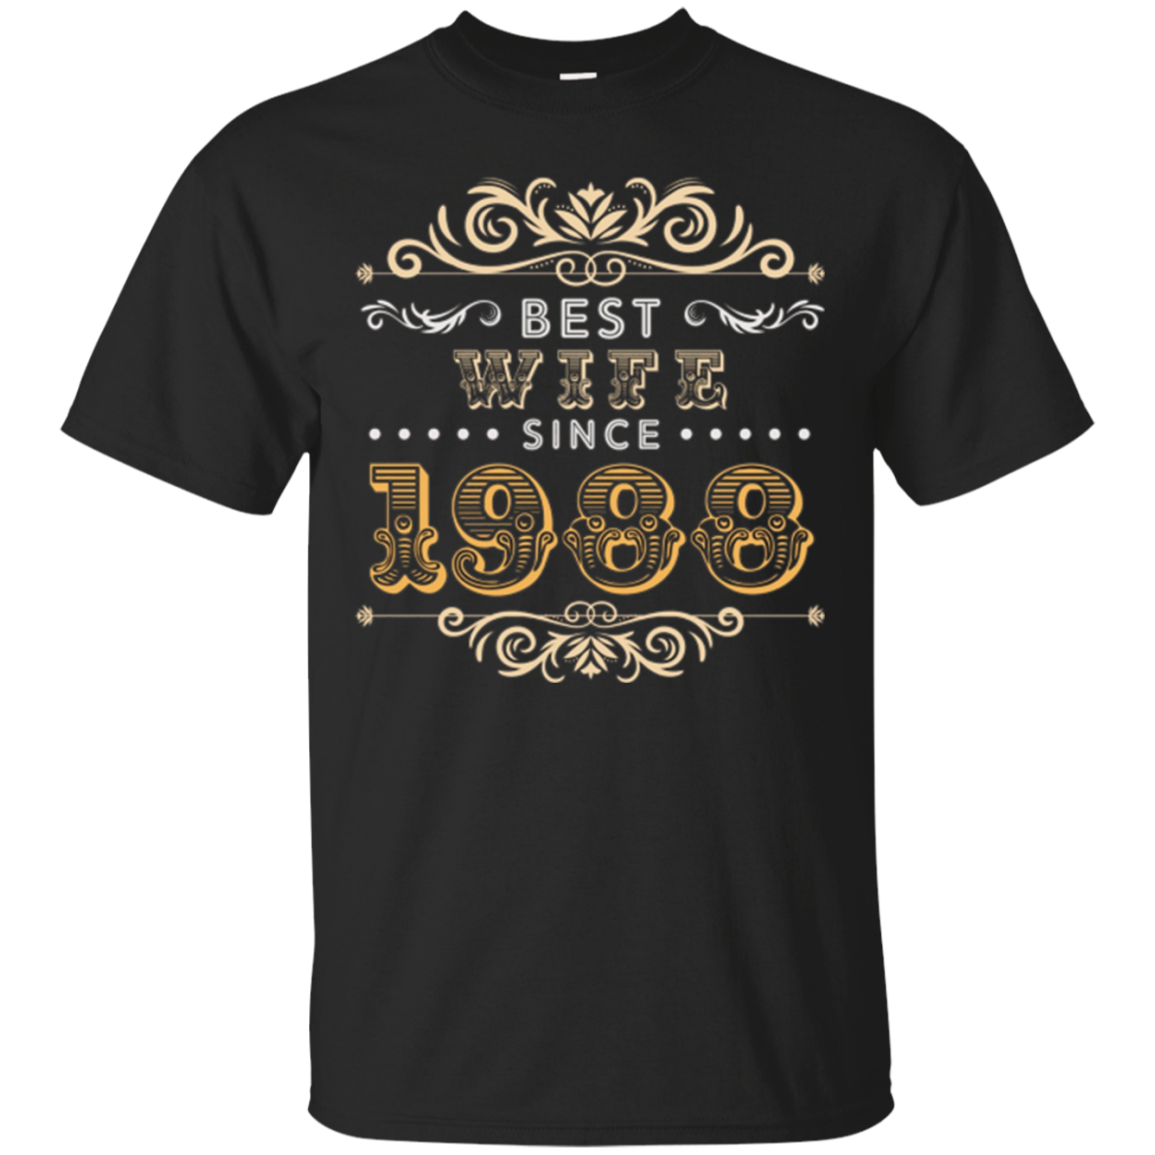 29th Wedding Anniversary Gifts 29 Best Wife Since 1988 Shirts